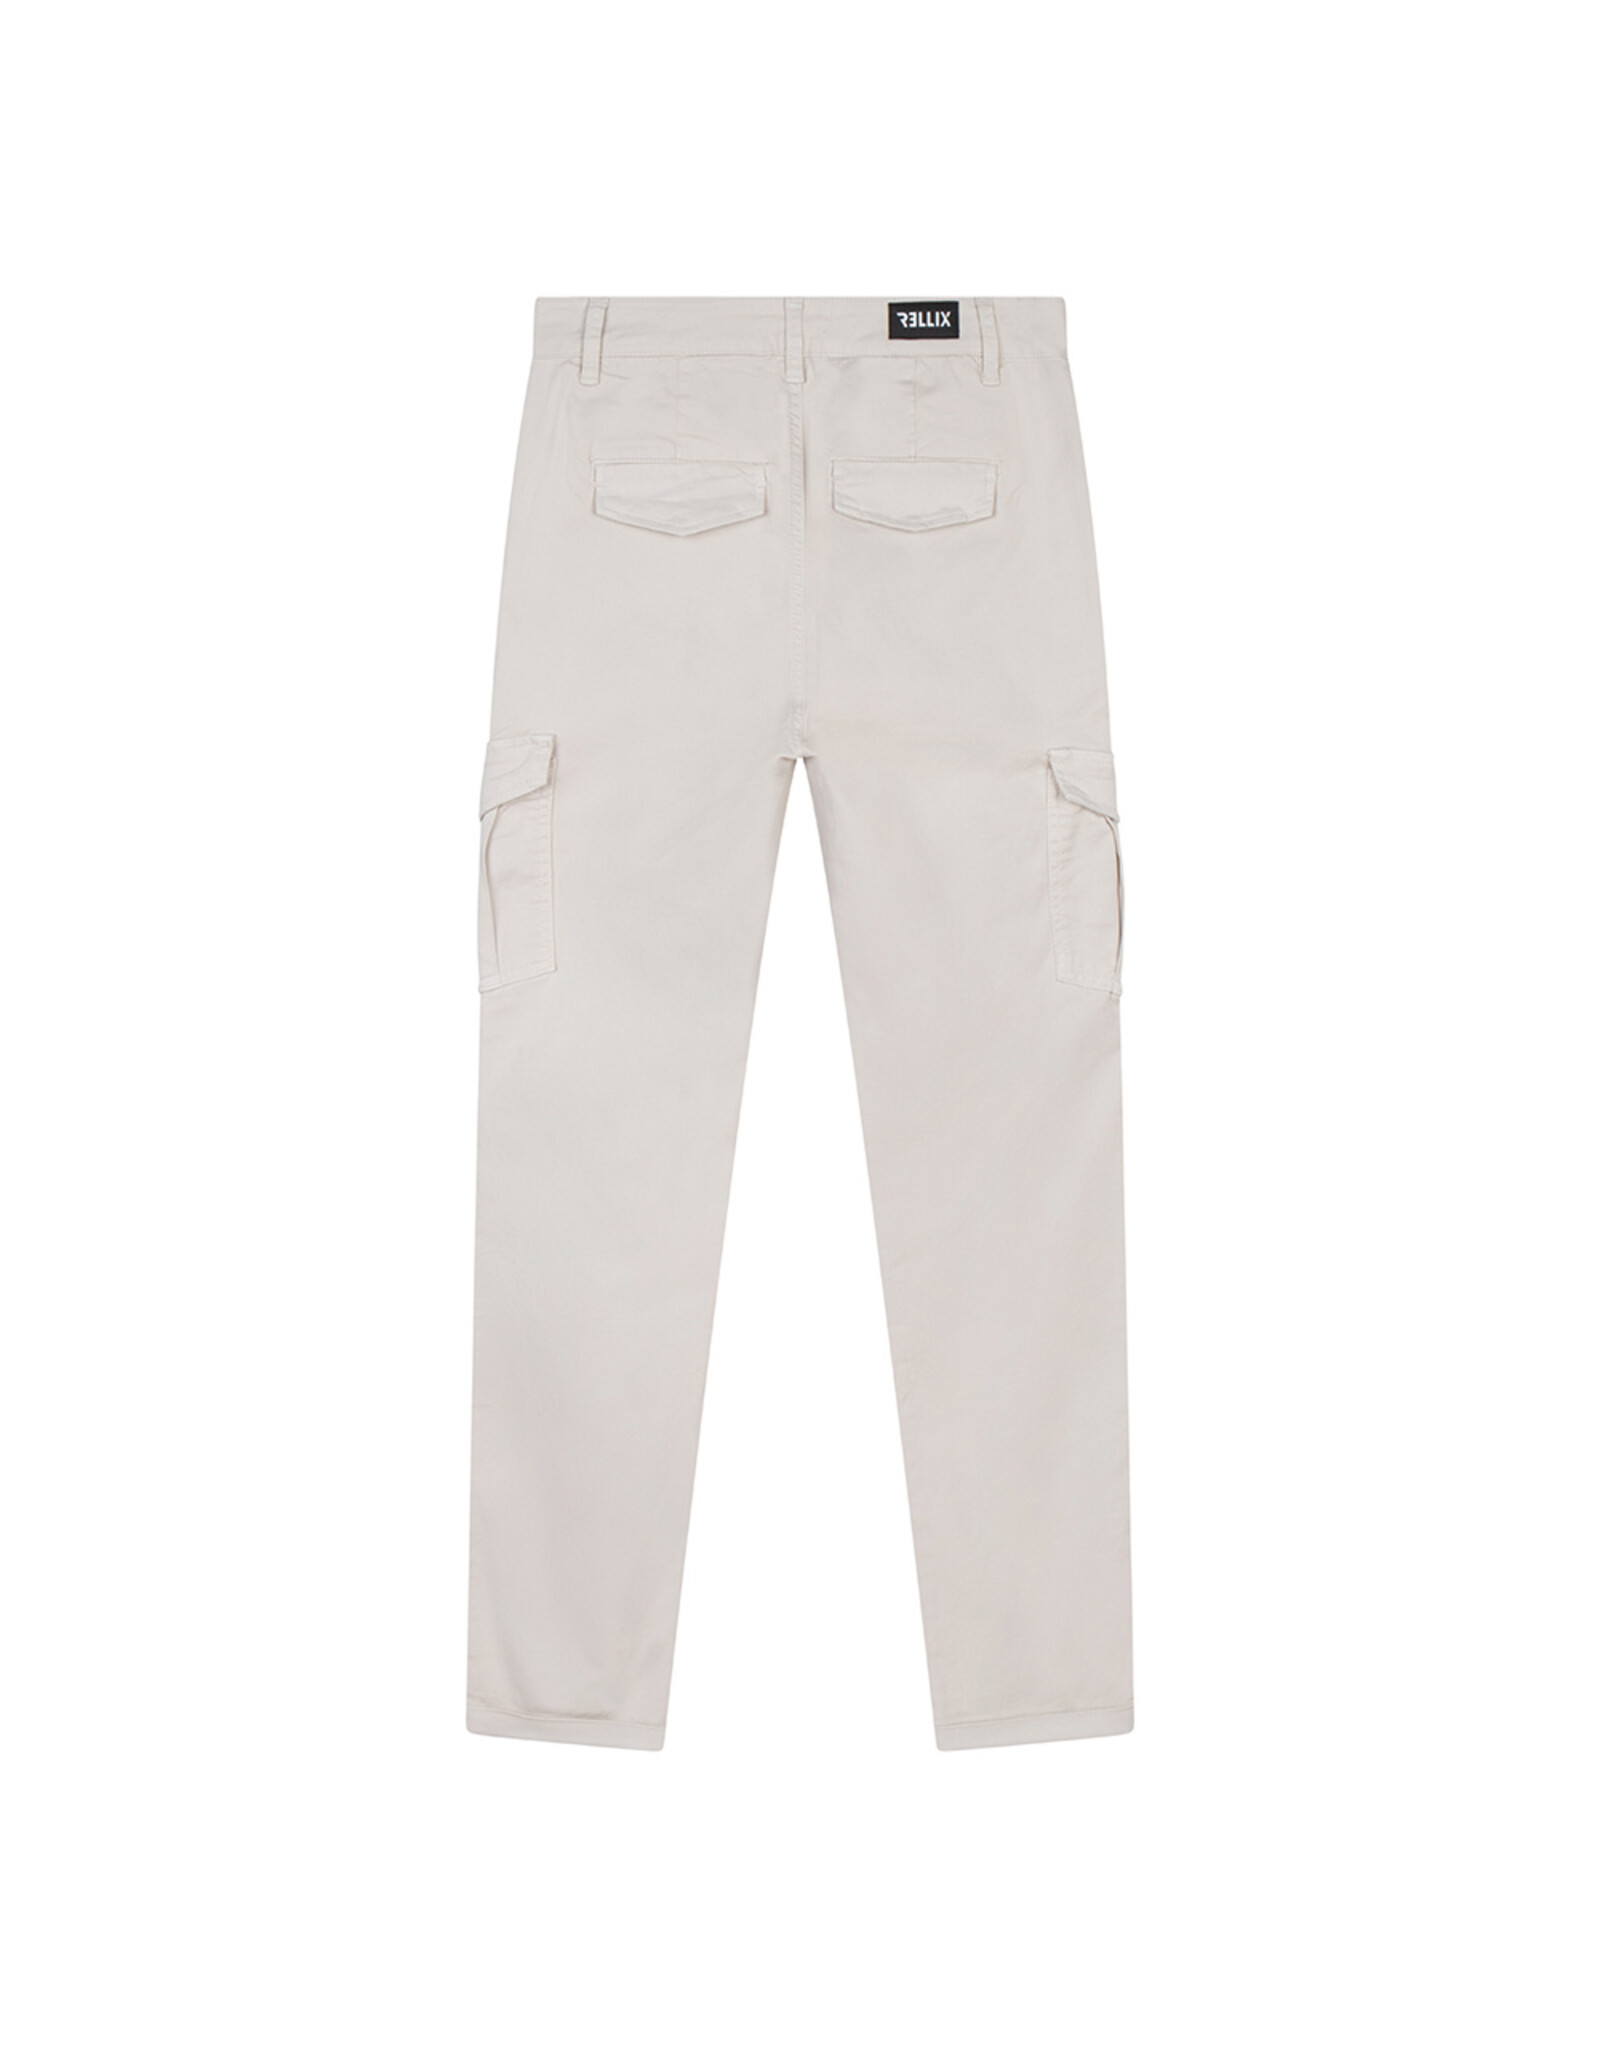 Rellix Cargo Pant Rellix Grey Kit-731